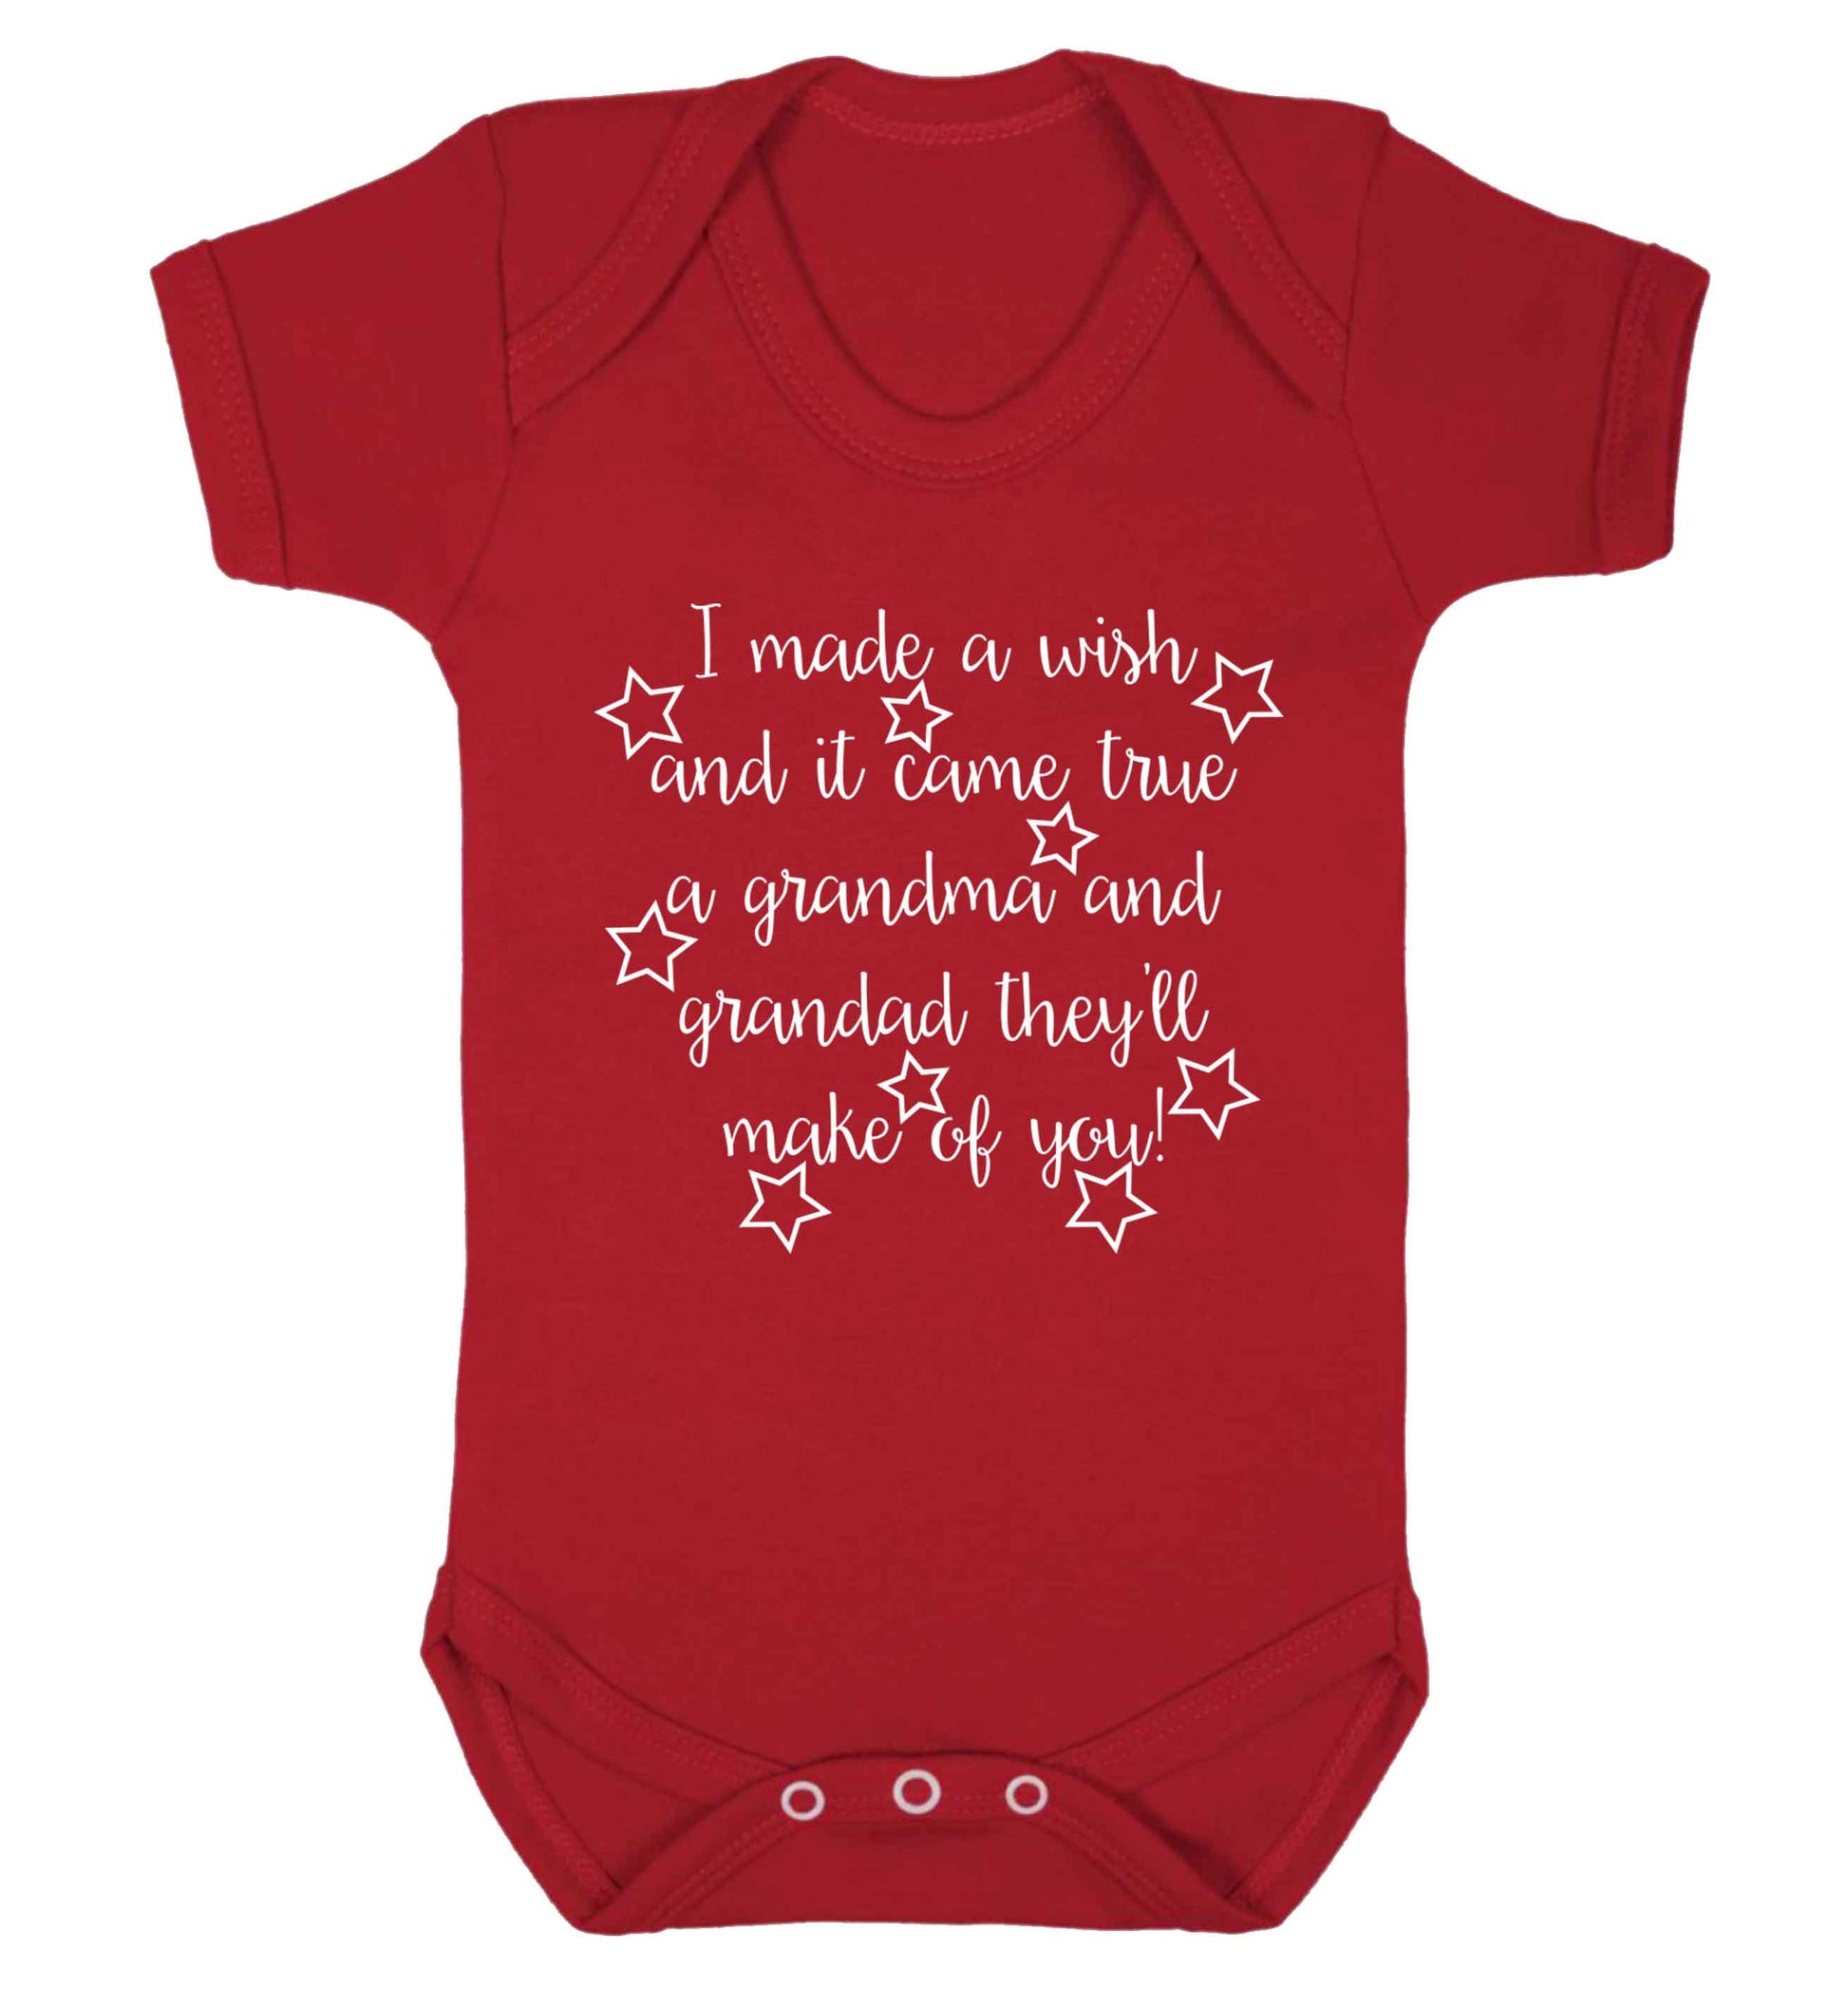 I made a wish and it came true a grandma and grandad they'll make of you! Baby Vest red 18-24 months